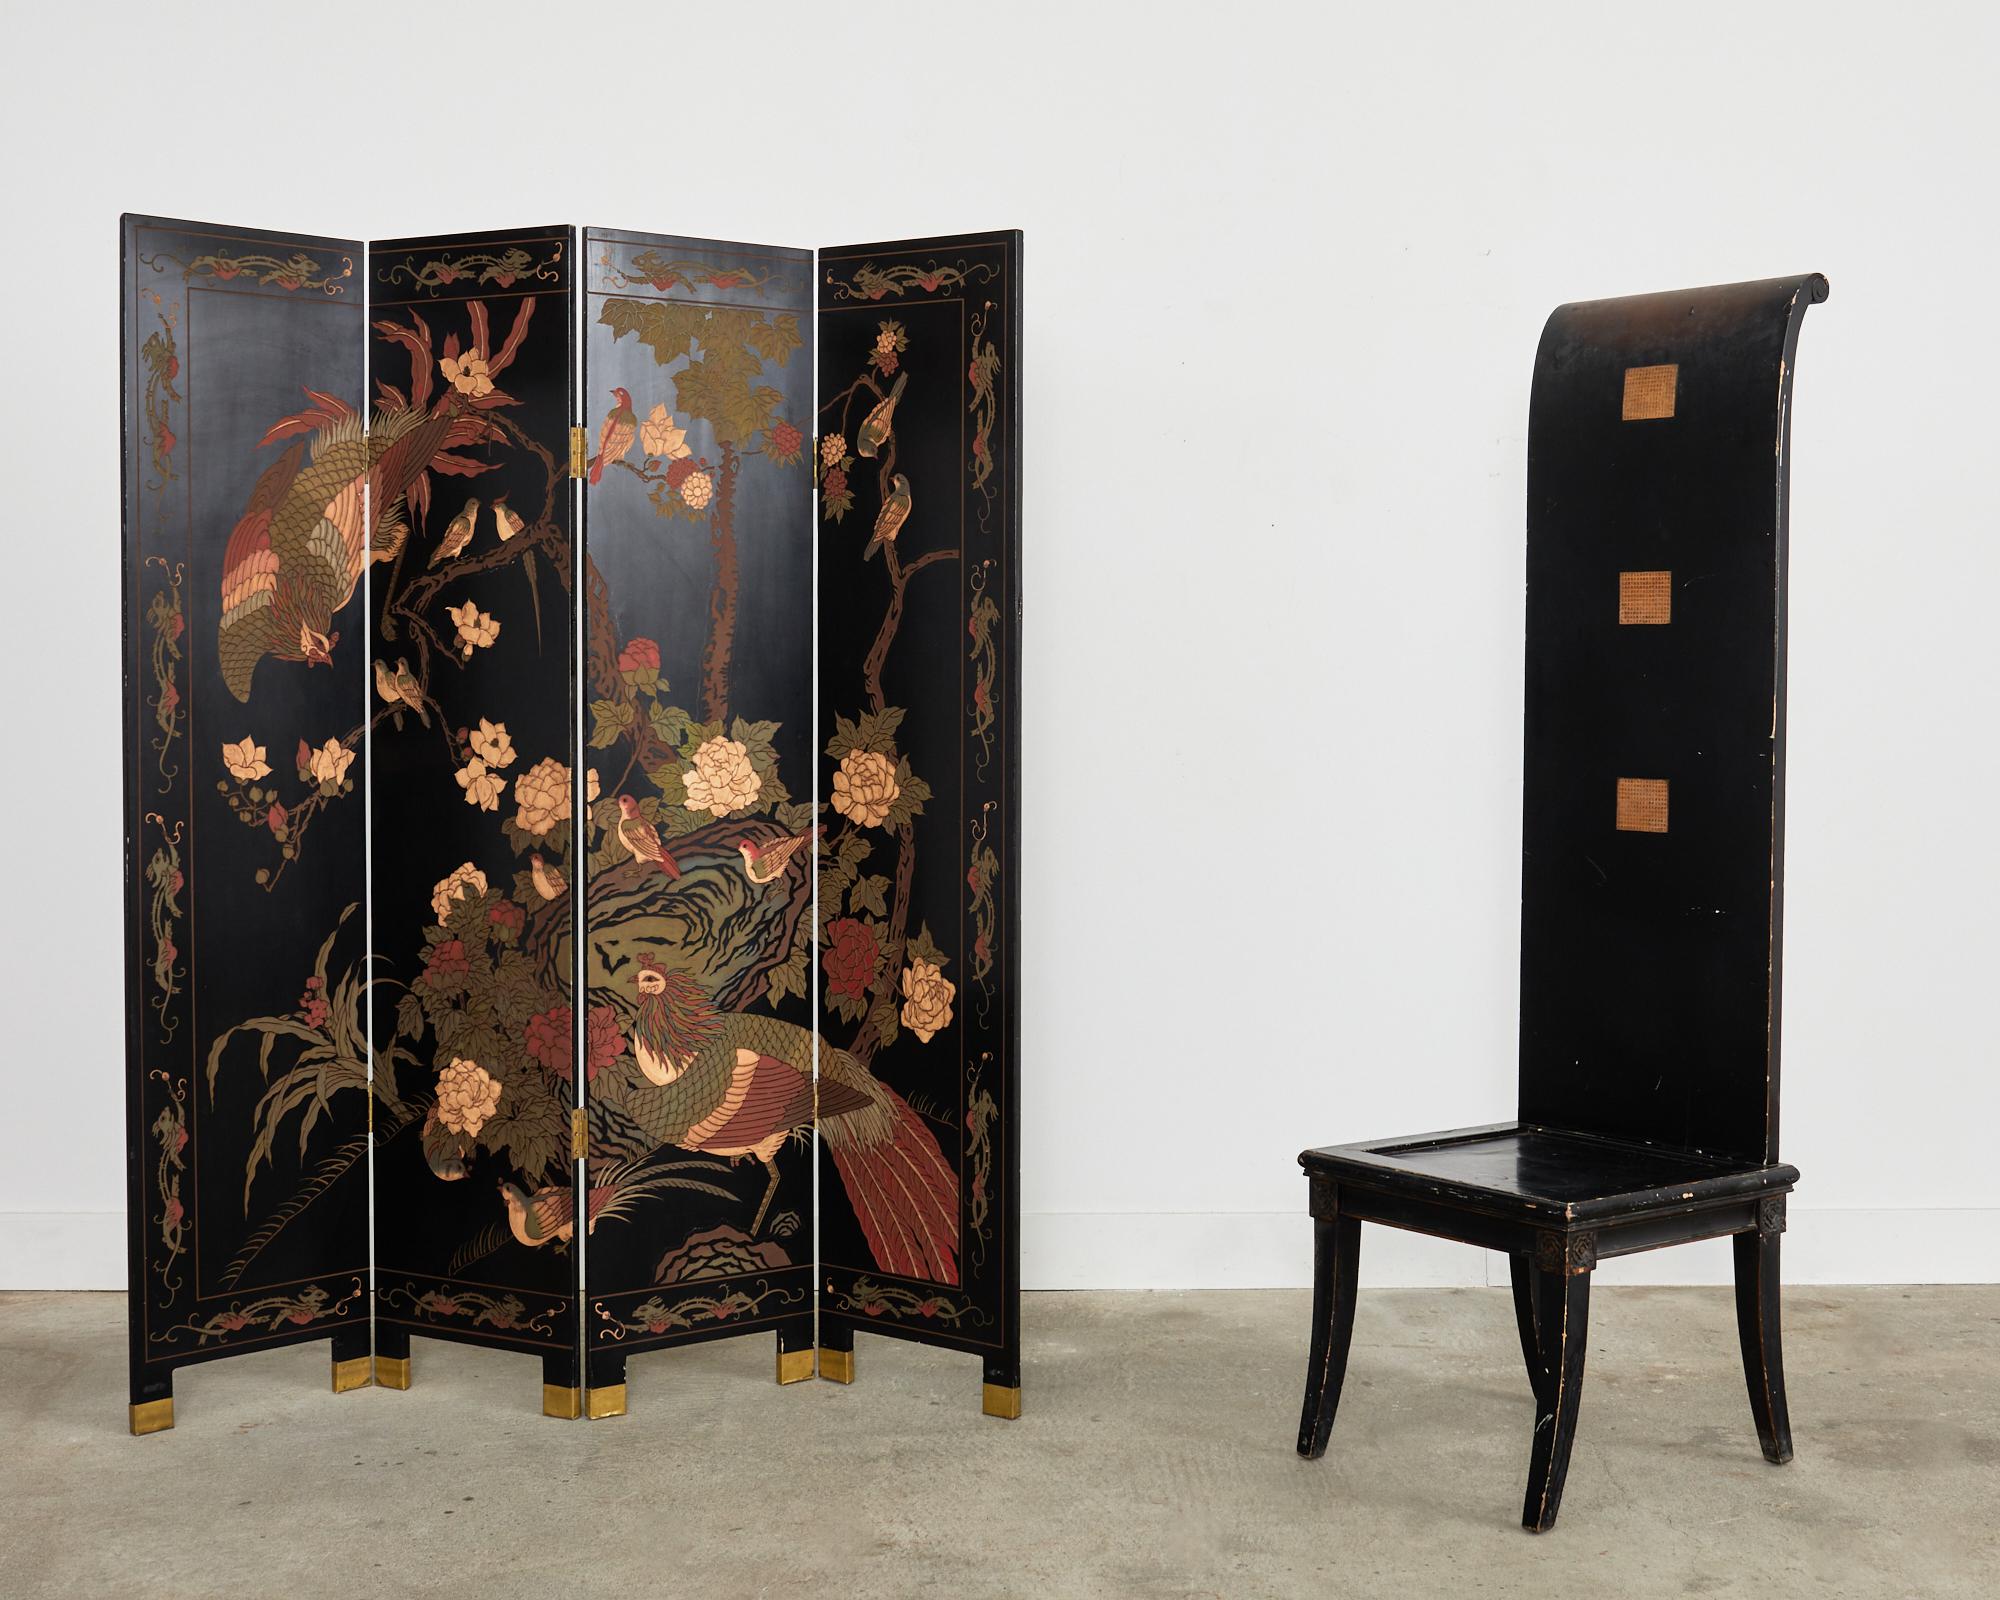 Gorgeous 20th century Chinese export four-panel coromandel screen featuring a landscape scene of flora and fauna. The lacquered panels are incised and painted with vibrant color pigments having a desirable faded patina. Decorated with large white